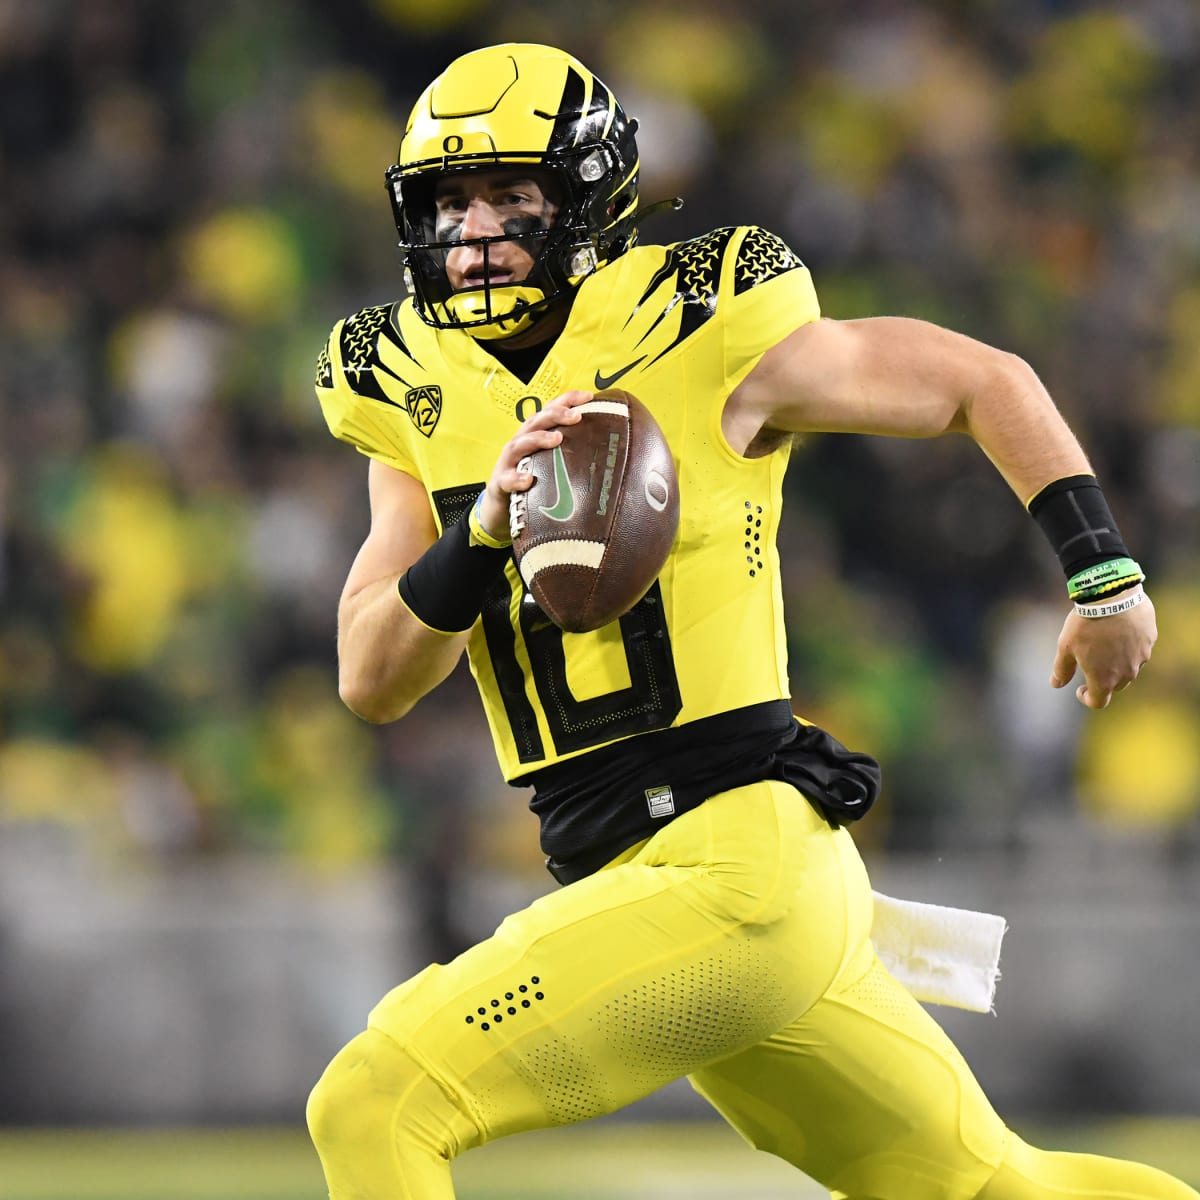 50 Oregon Football Uniforms That Changed The Way We See College Football